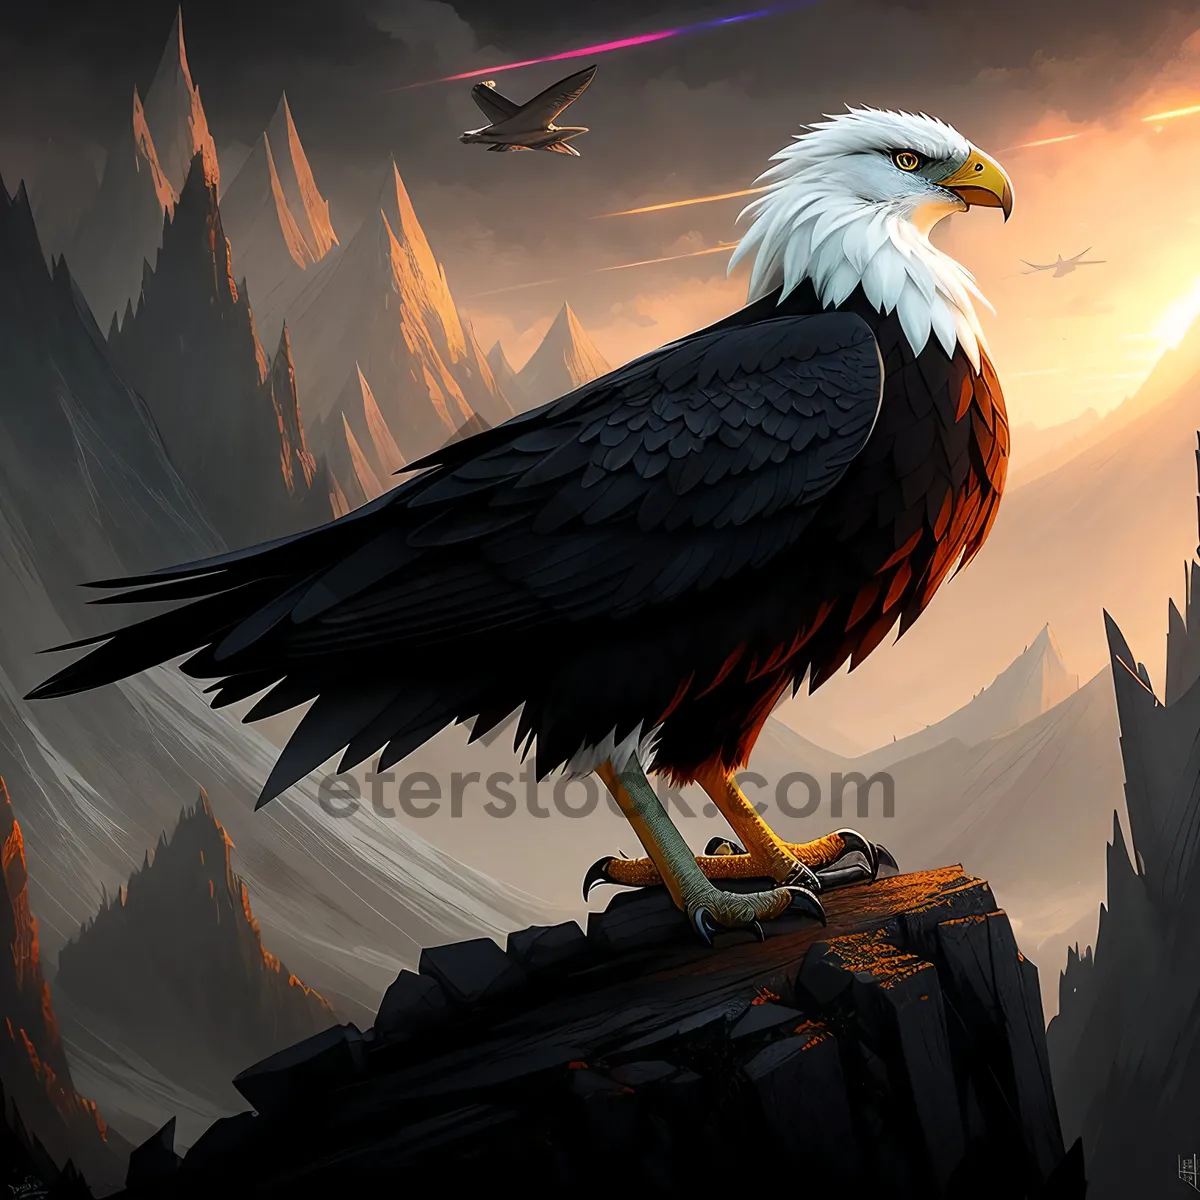 Picture of Wild Hunter: Majestic Bald Eagle Soaring with Intense Gaze